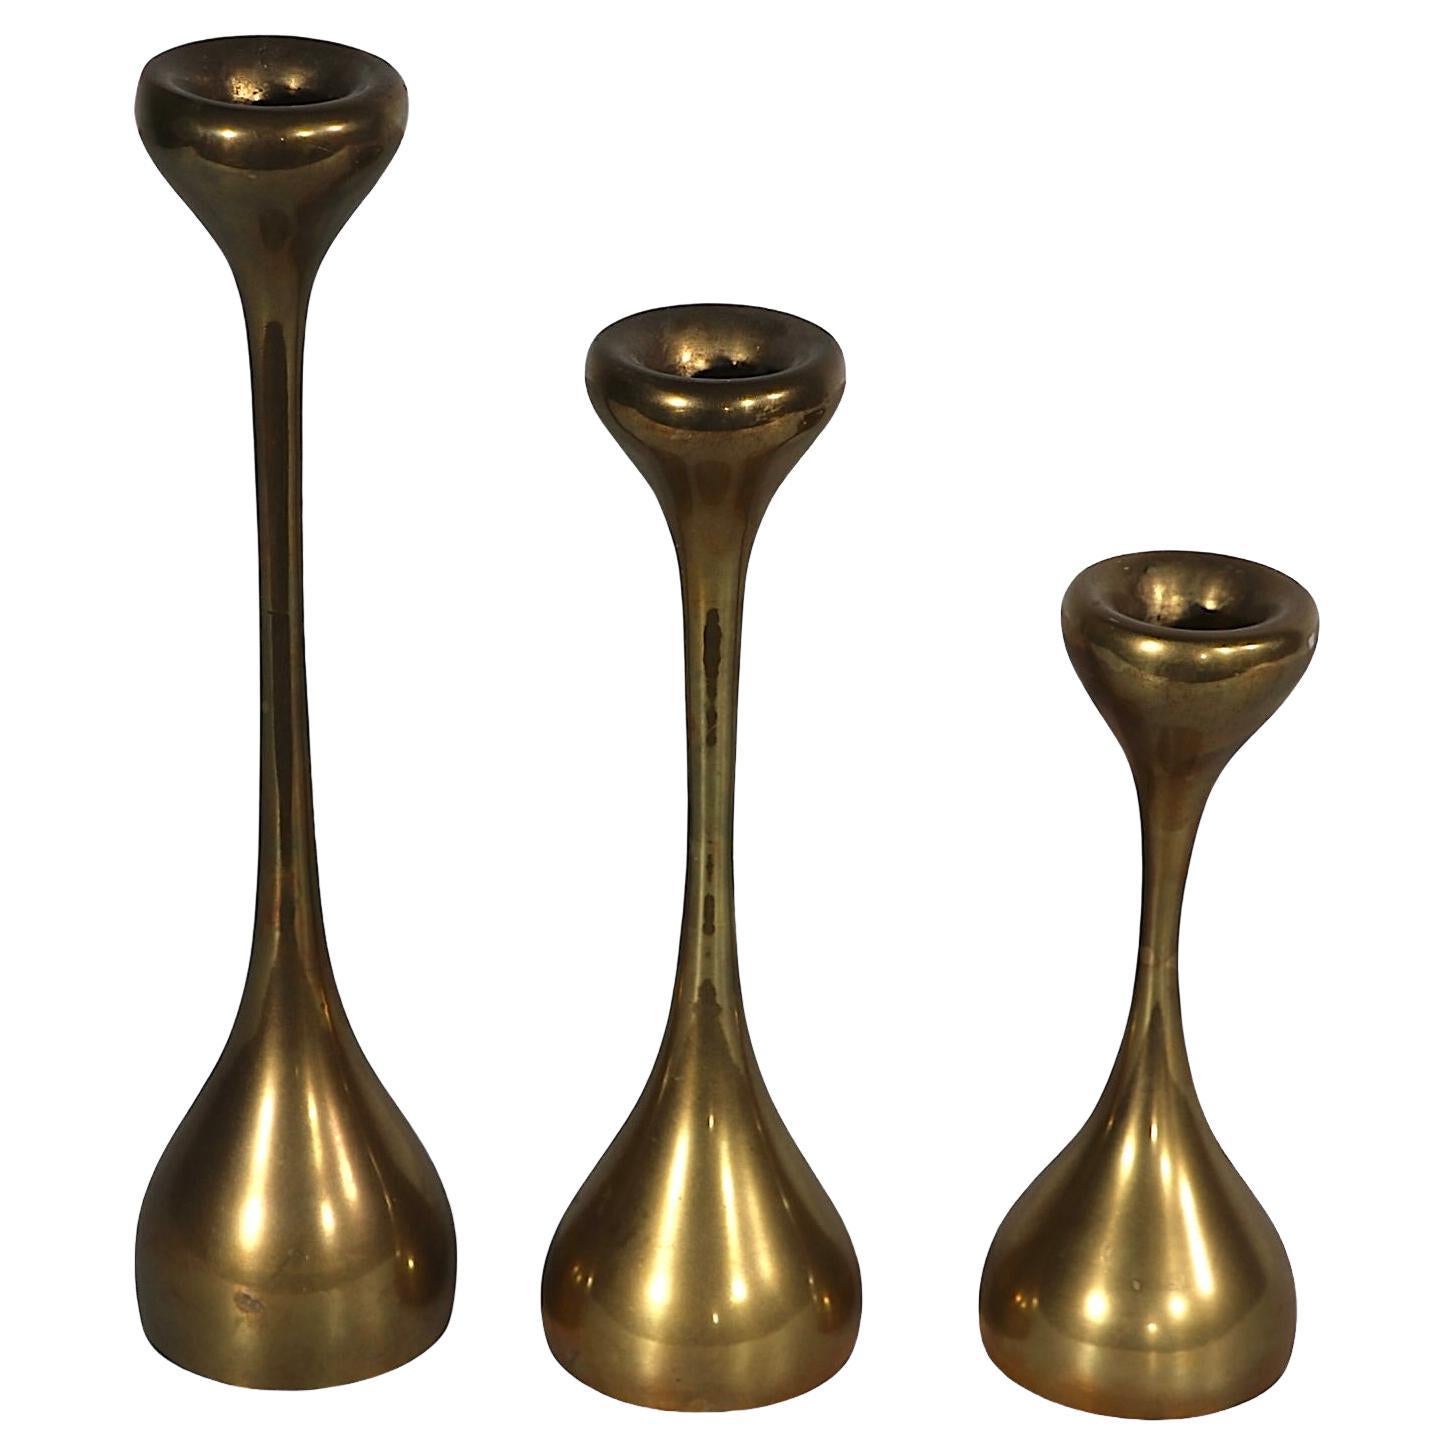 Elegant set of three Organic Modern candlesticks, having bulbous bases, elongated shafts, and  curvaceous candle cups. All three are in very fine, clean, original, ready to use condition. Possibly made in Denny, or Sweden, these examples are